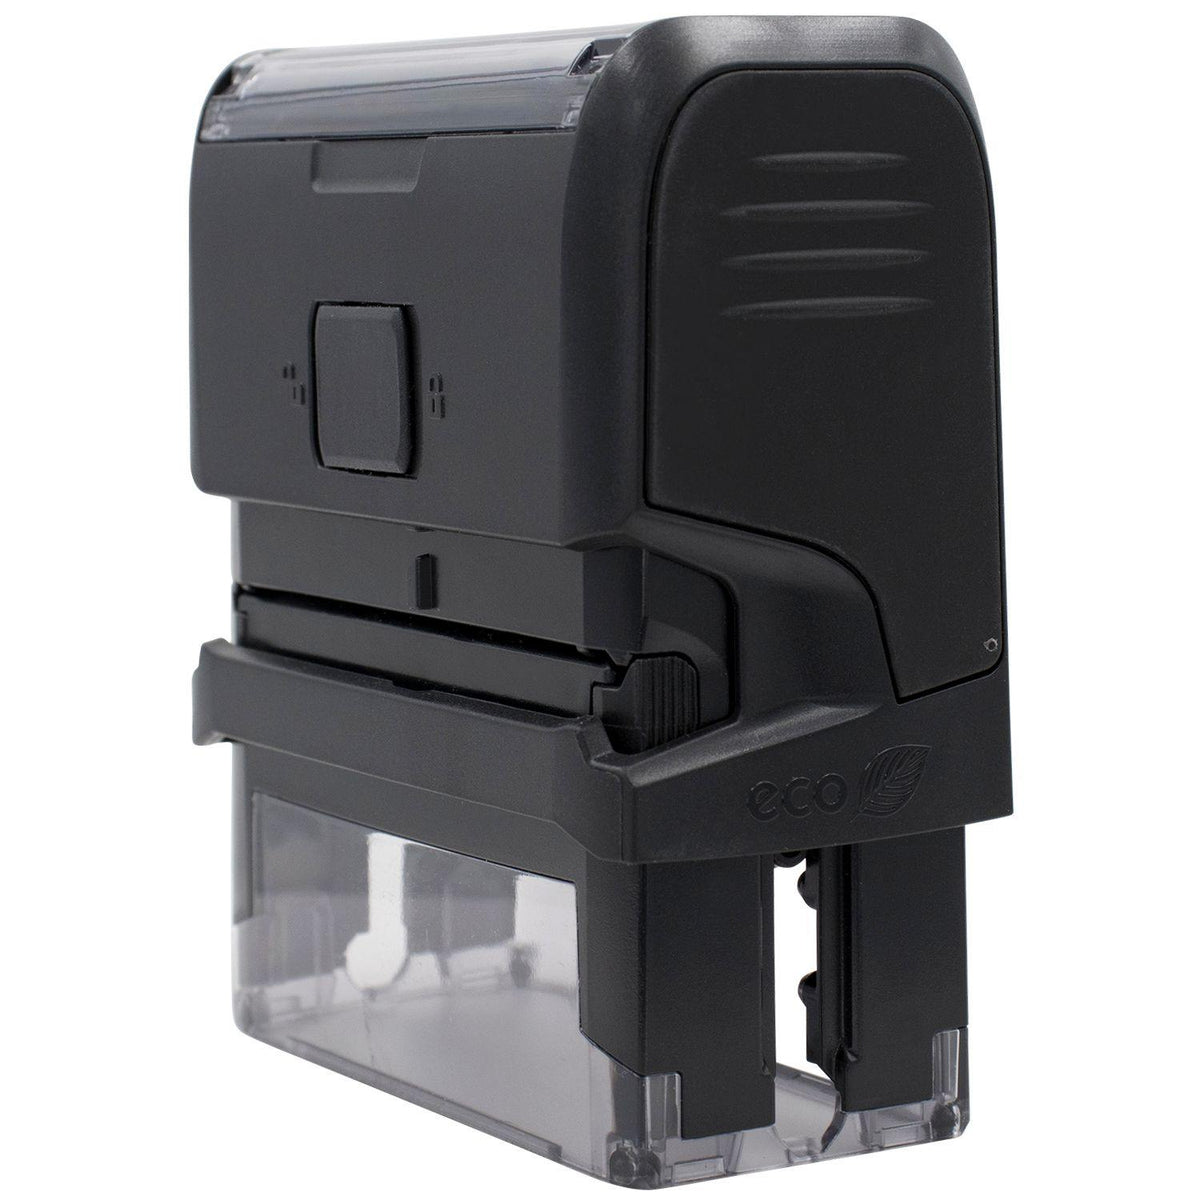 Large Self Inking Validate Only Stamp - Engineer Seal Stamps - Brand_Trodat, Impression Size_Large, Stamp Type_Self-Inking Stamp, Type of Use_Office